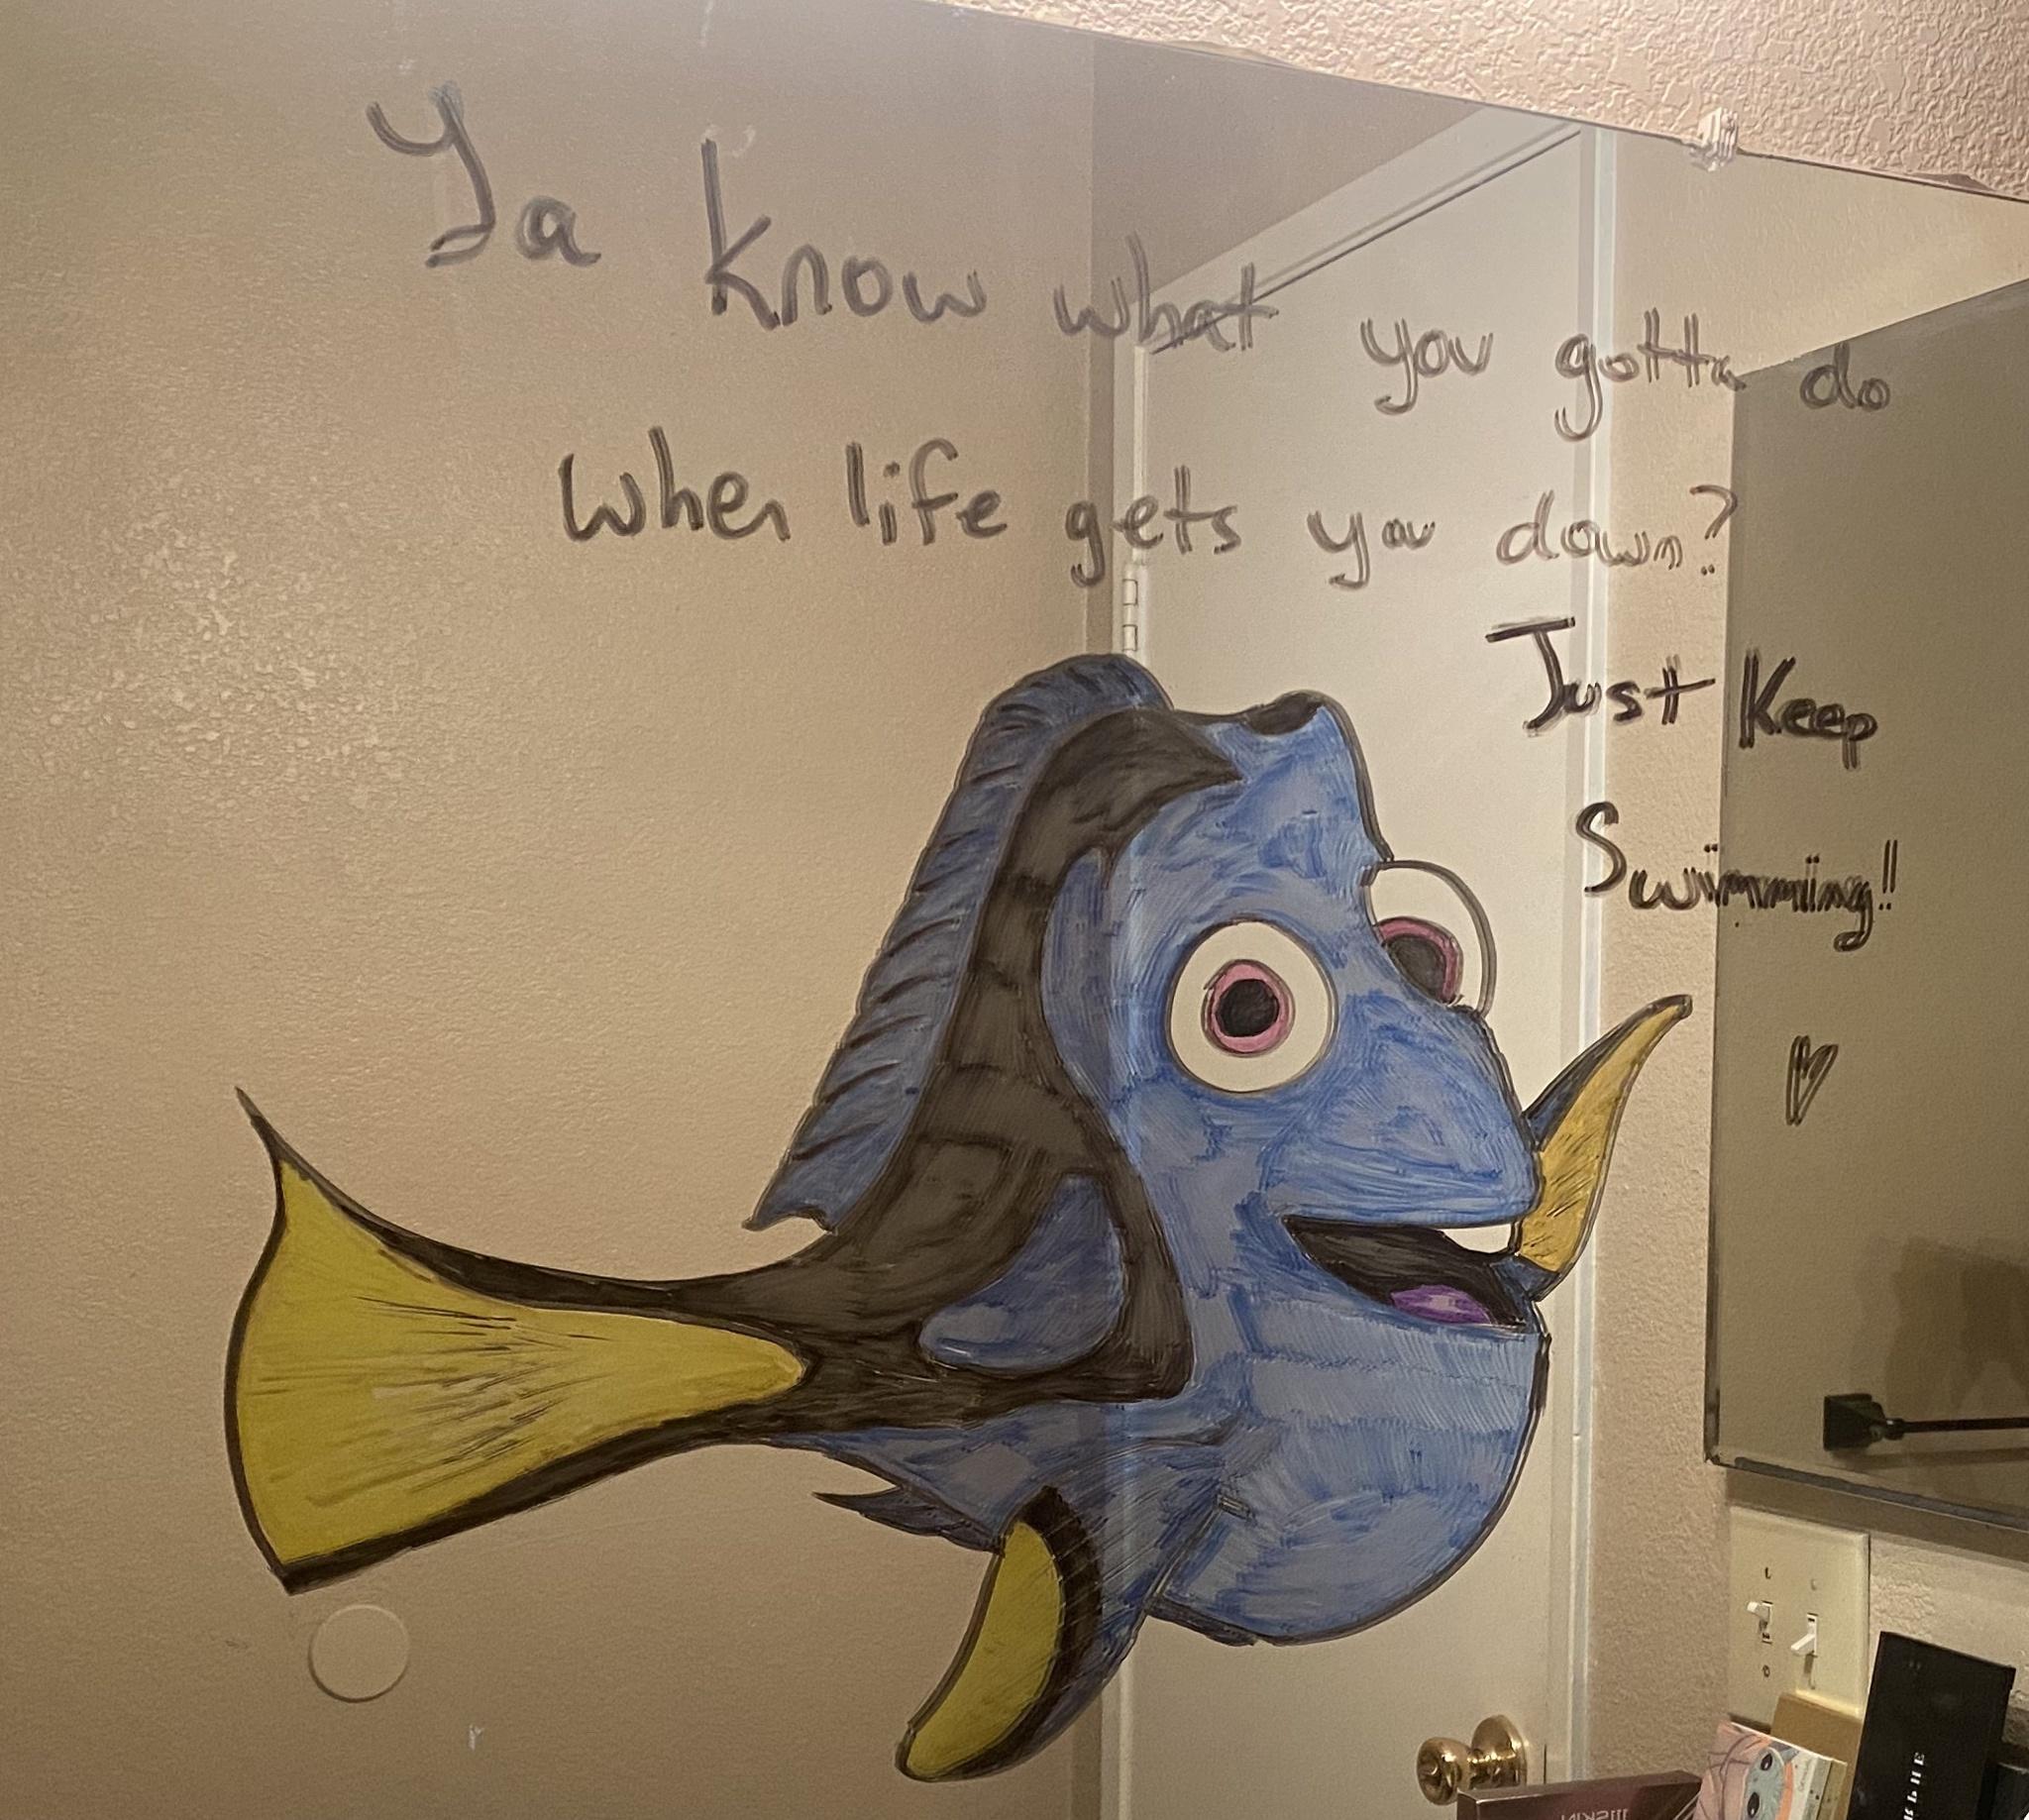 art - Ja know now what you gotta do When life gets you down? Just Keep Swimming!